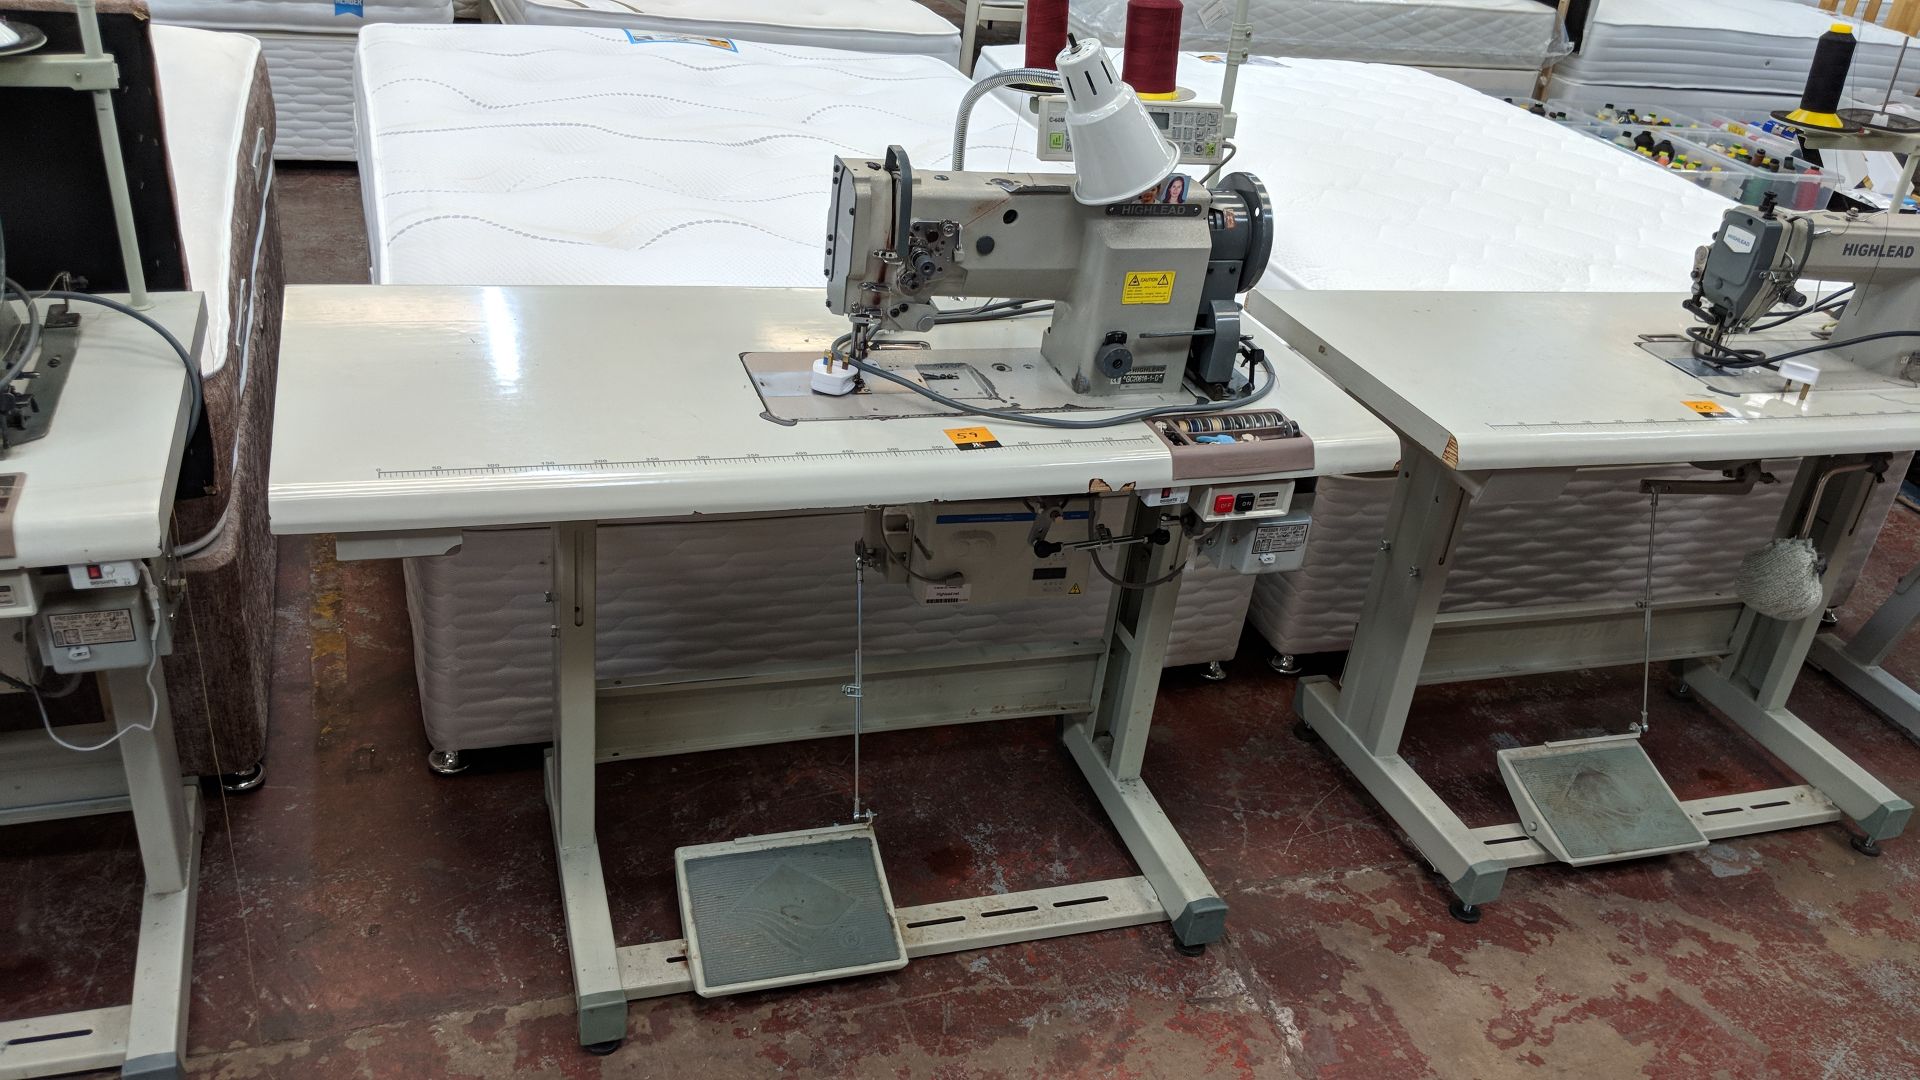 Highlead mode GC20618-1-D sewing machine including model C-60M digital read out/controller, on bench - Image 2 of 5